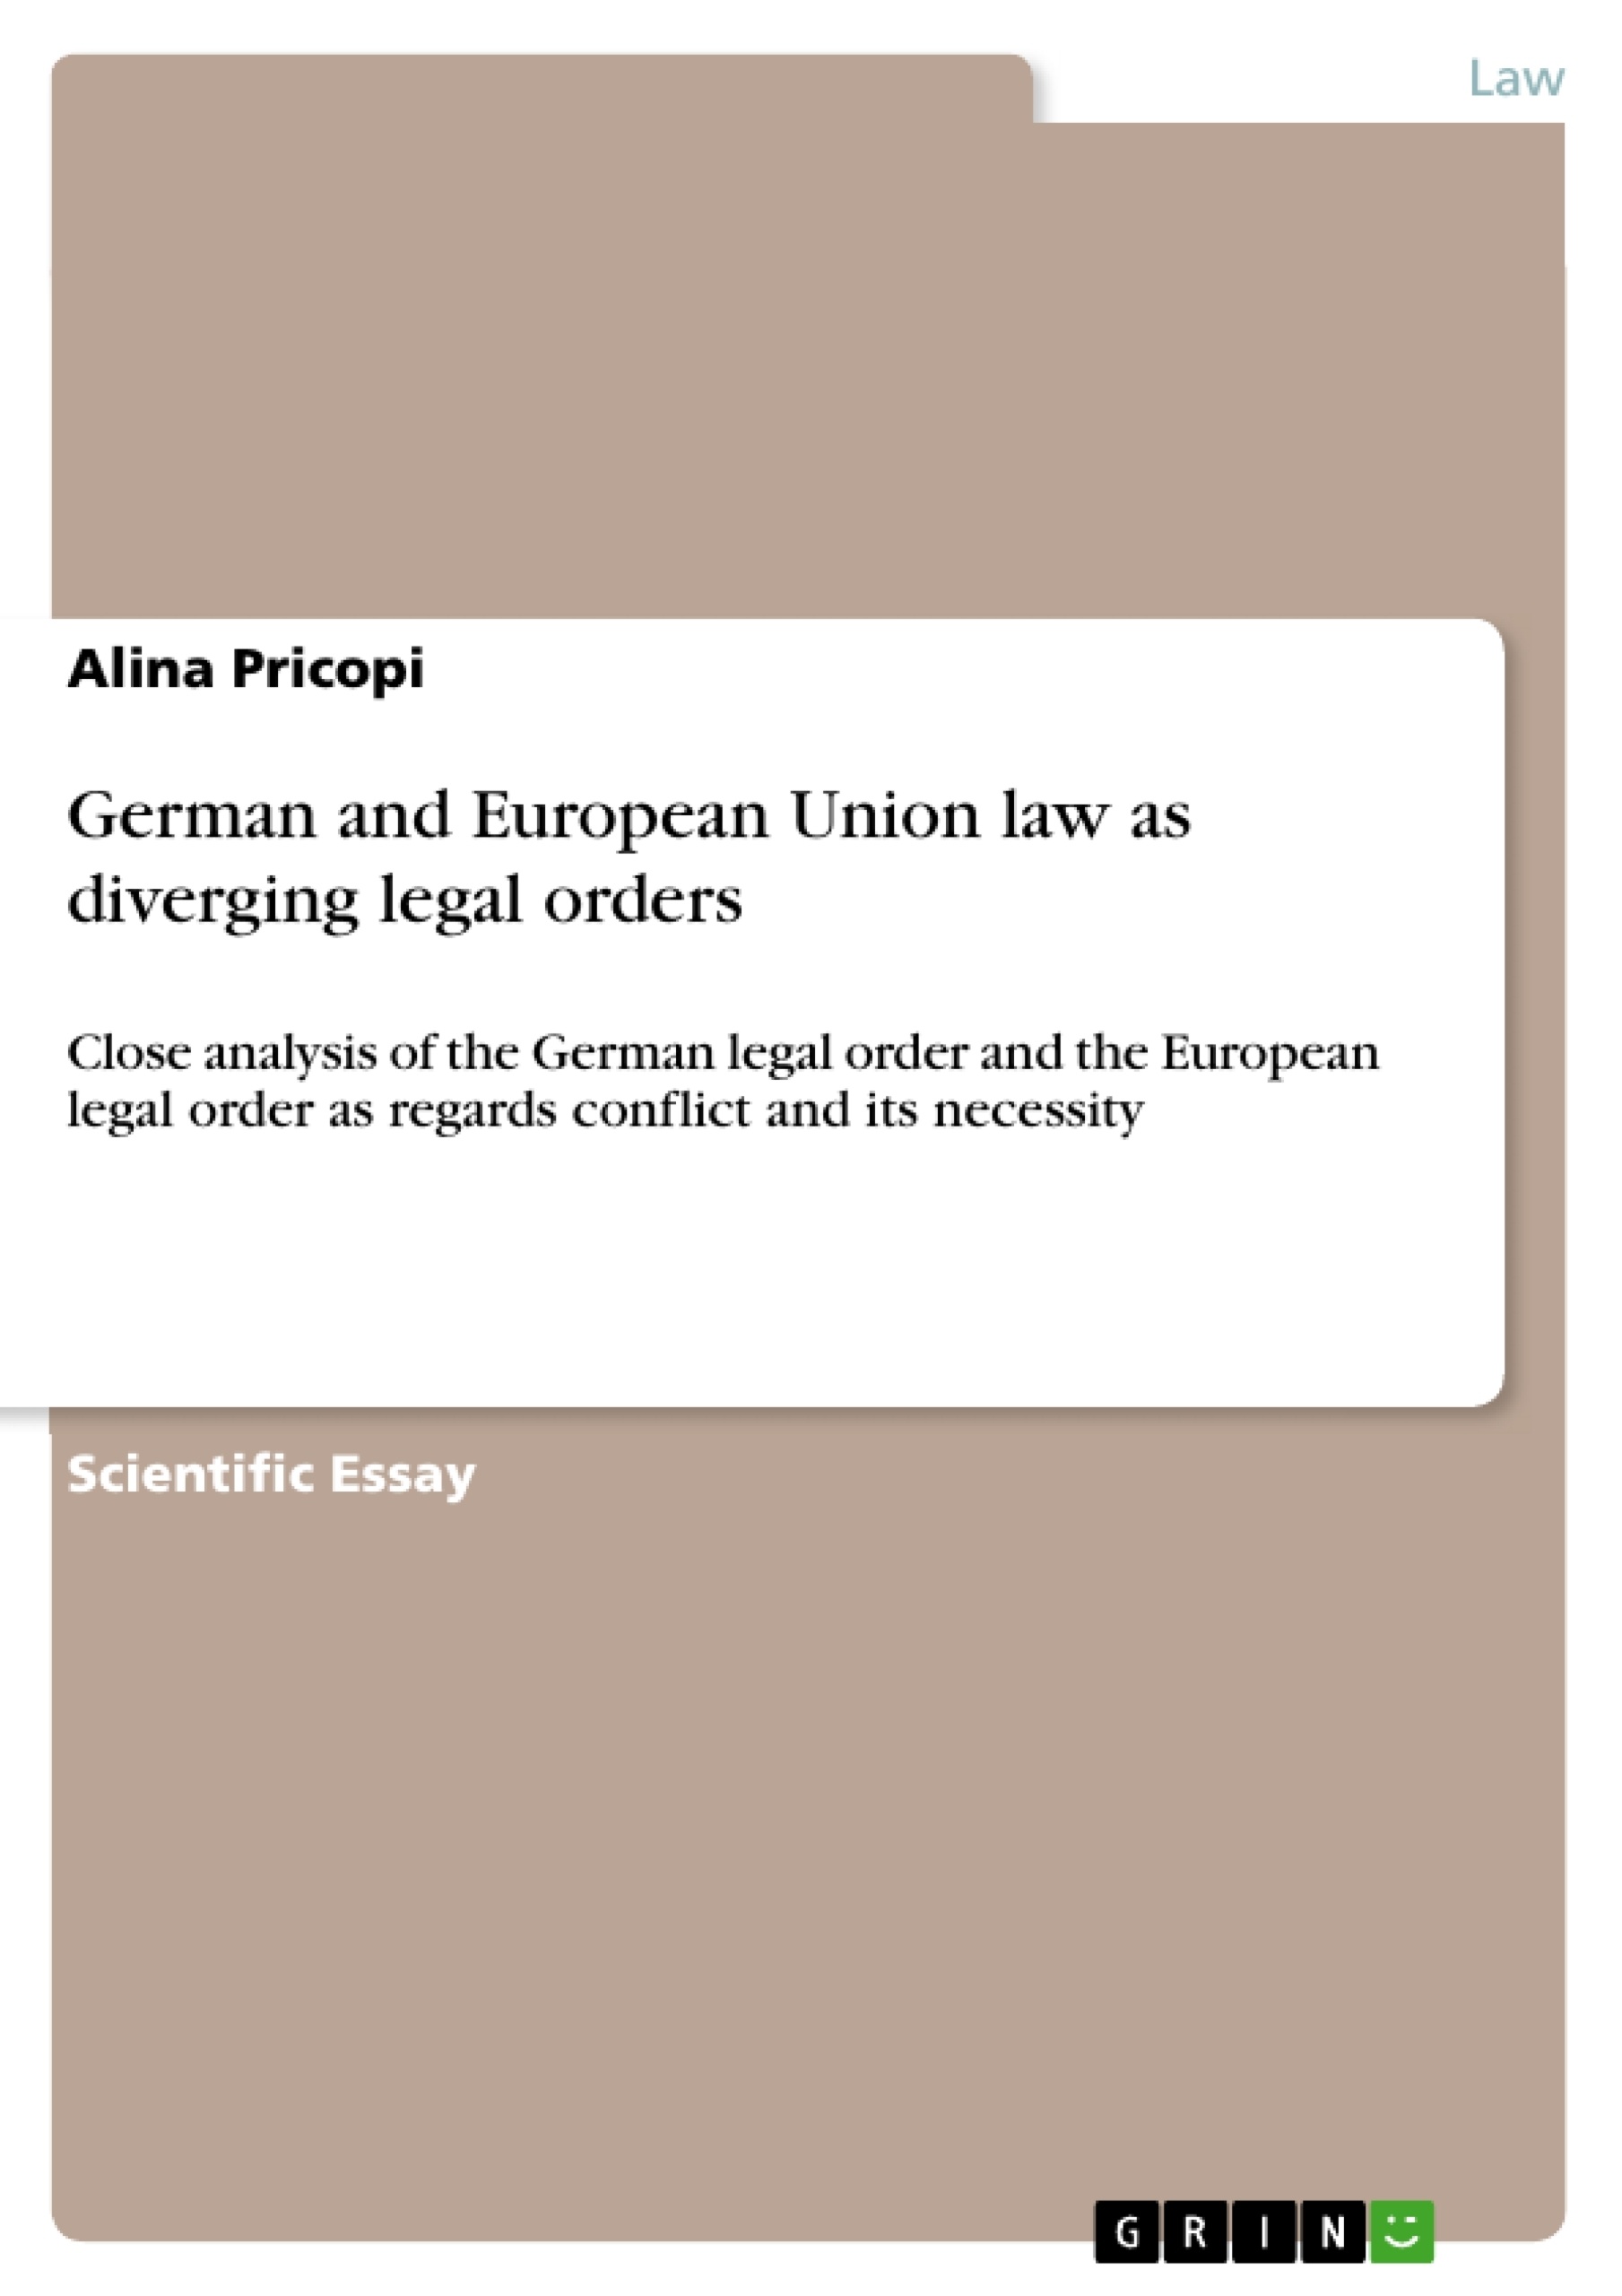 Title: German and European Union law as diverging legal orders